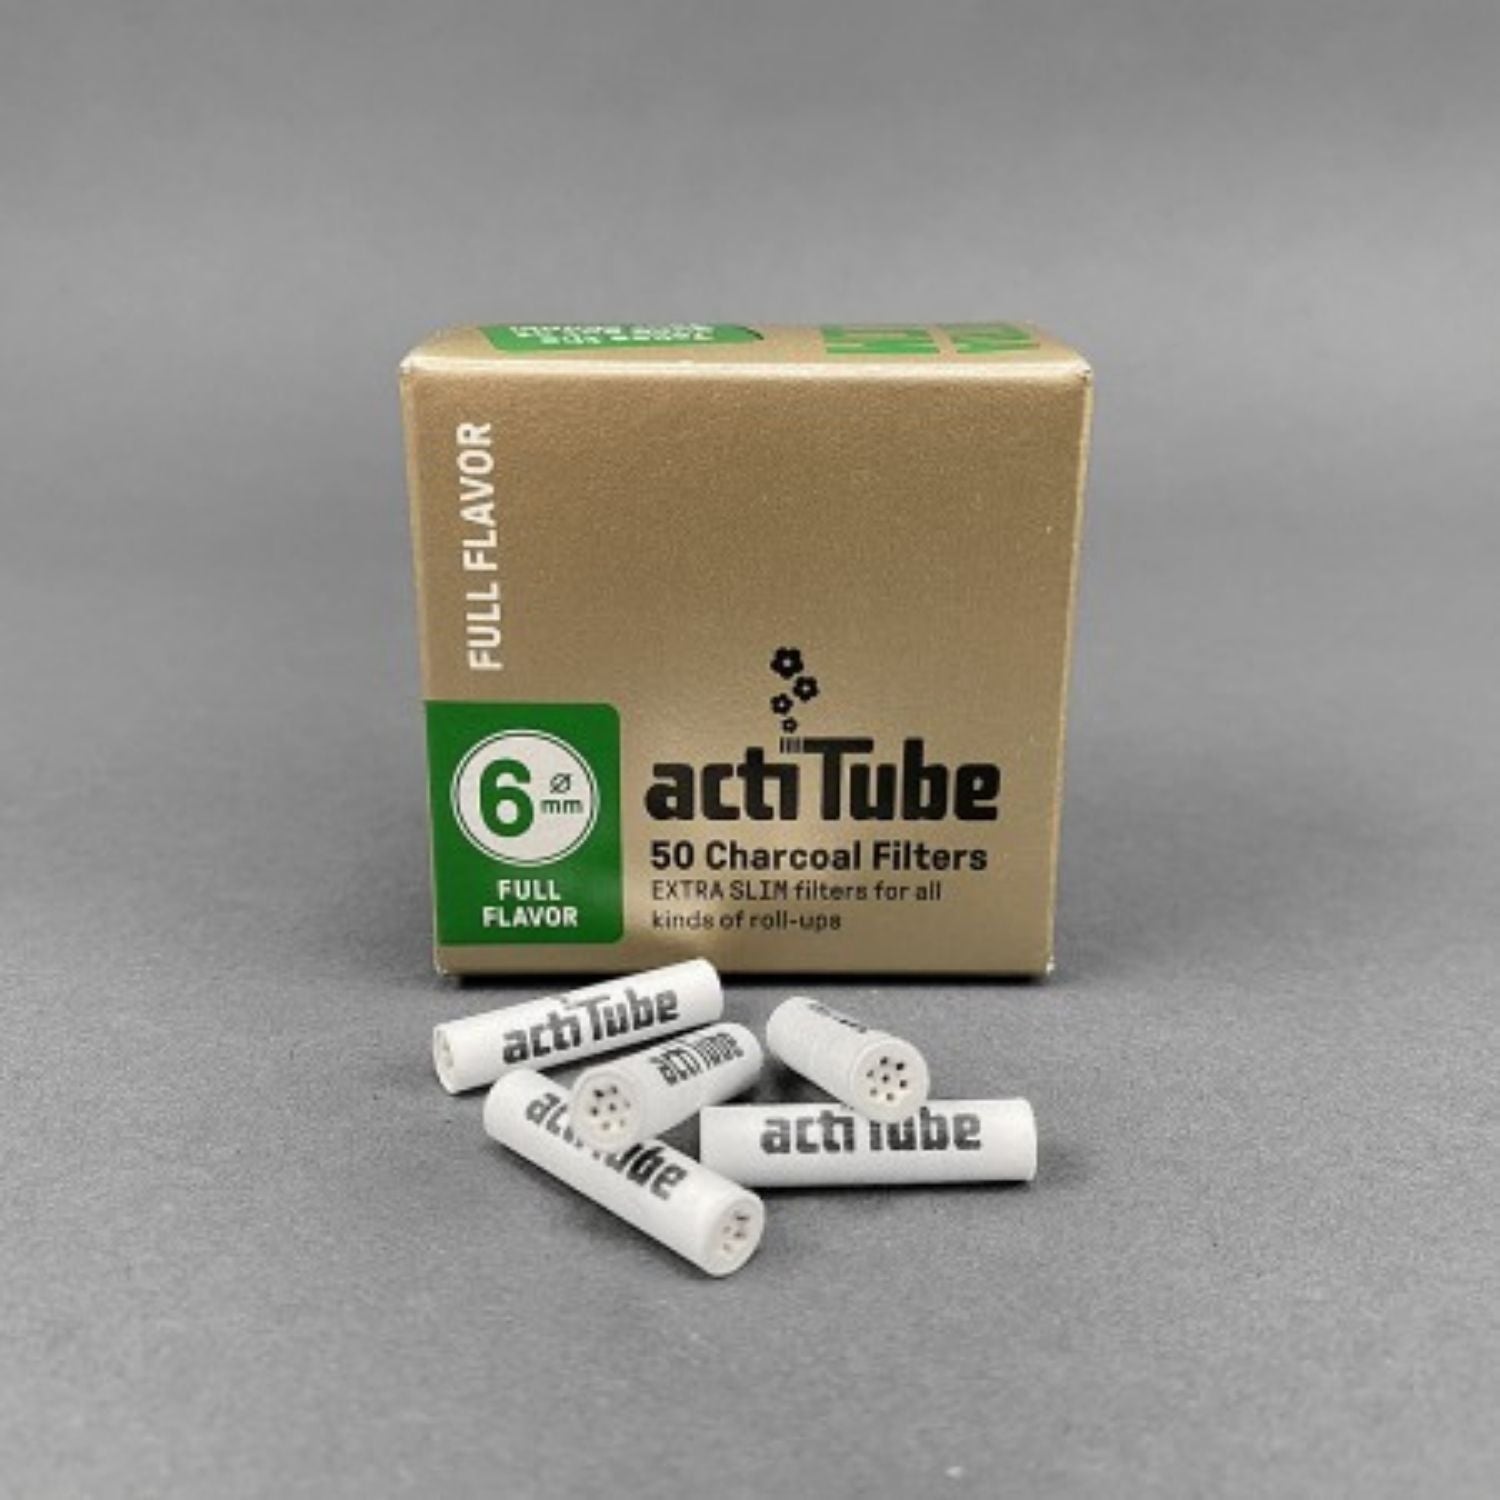 actiTube, Activ Charcoal Slim 6mm Diameter Filters Box 50pcs in box, Active Charcoal Filter, Rolling Equipment, HEADSHOP